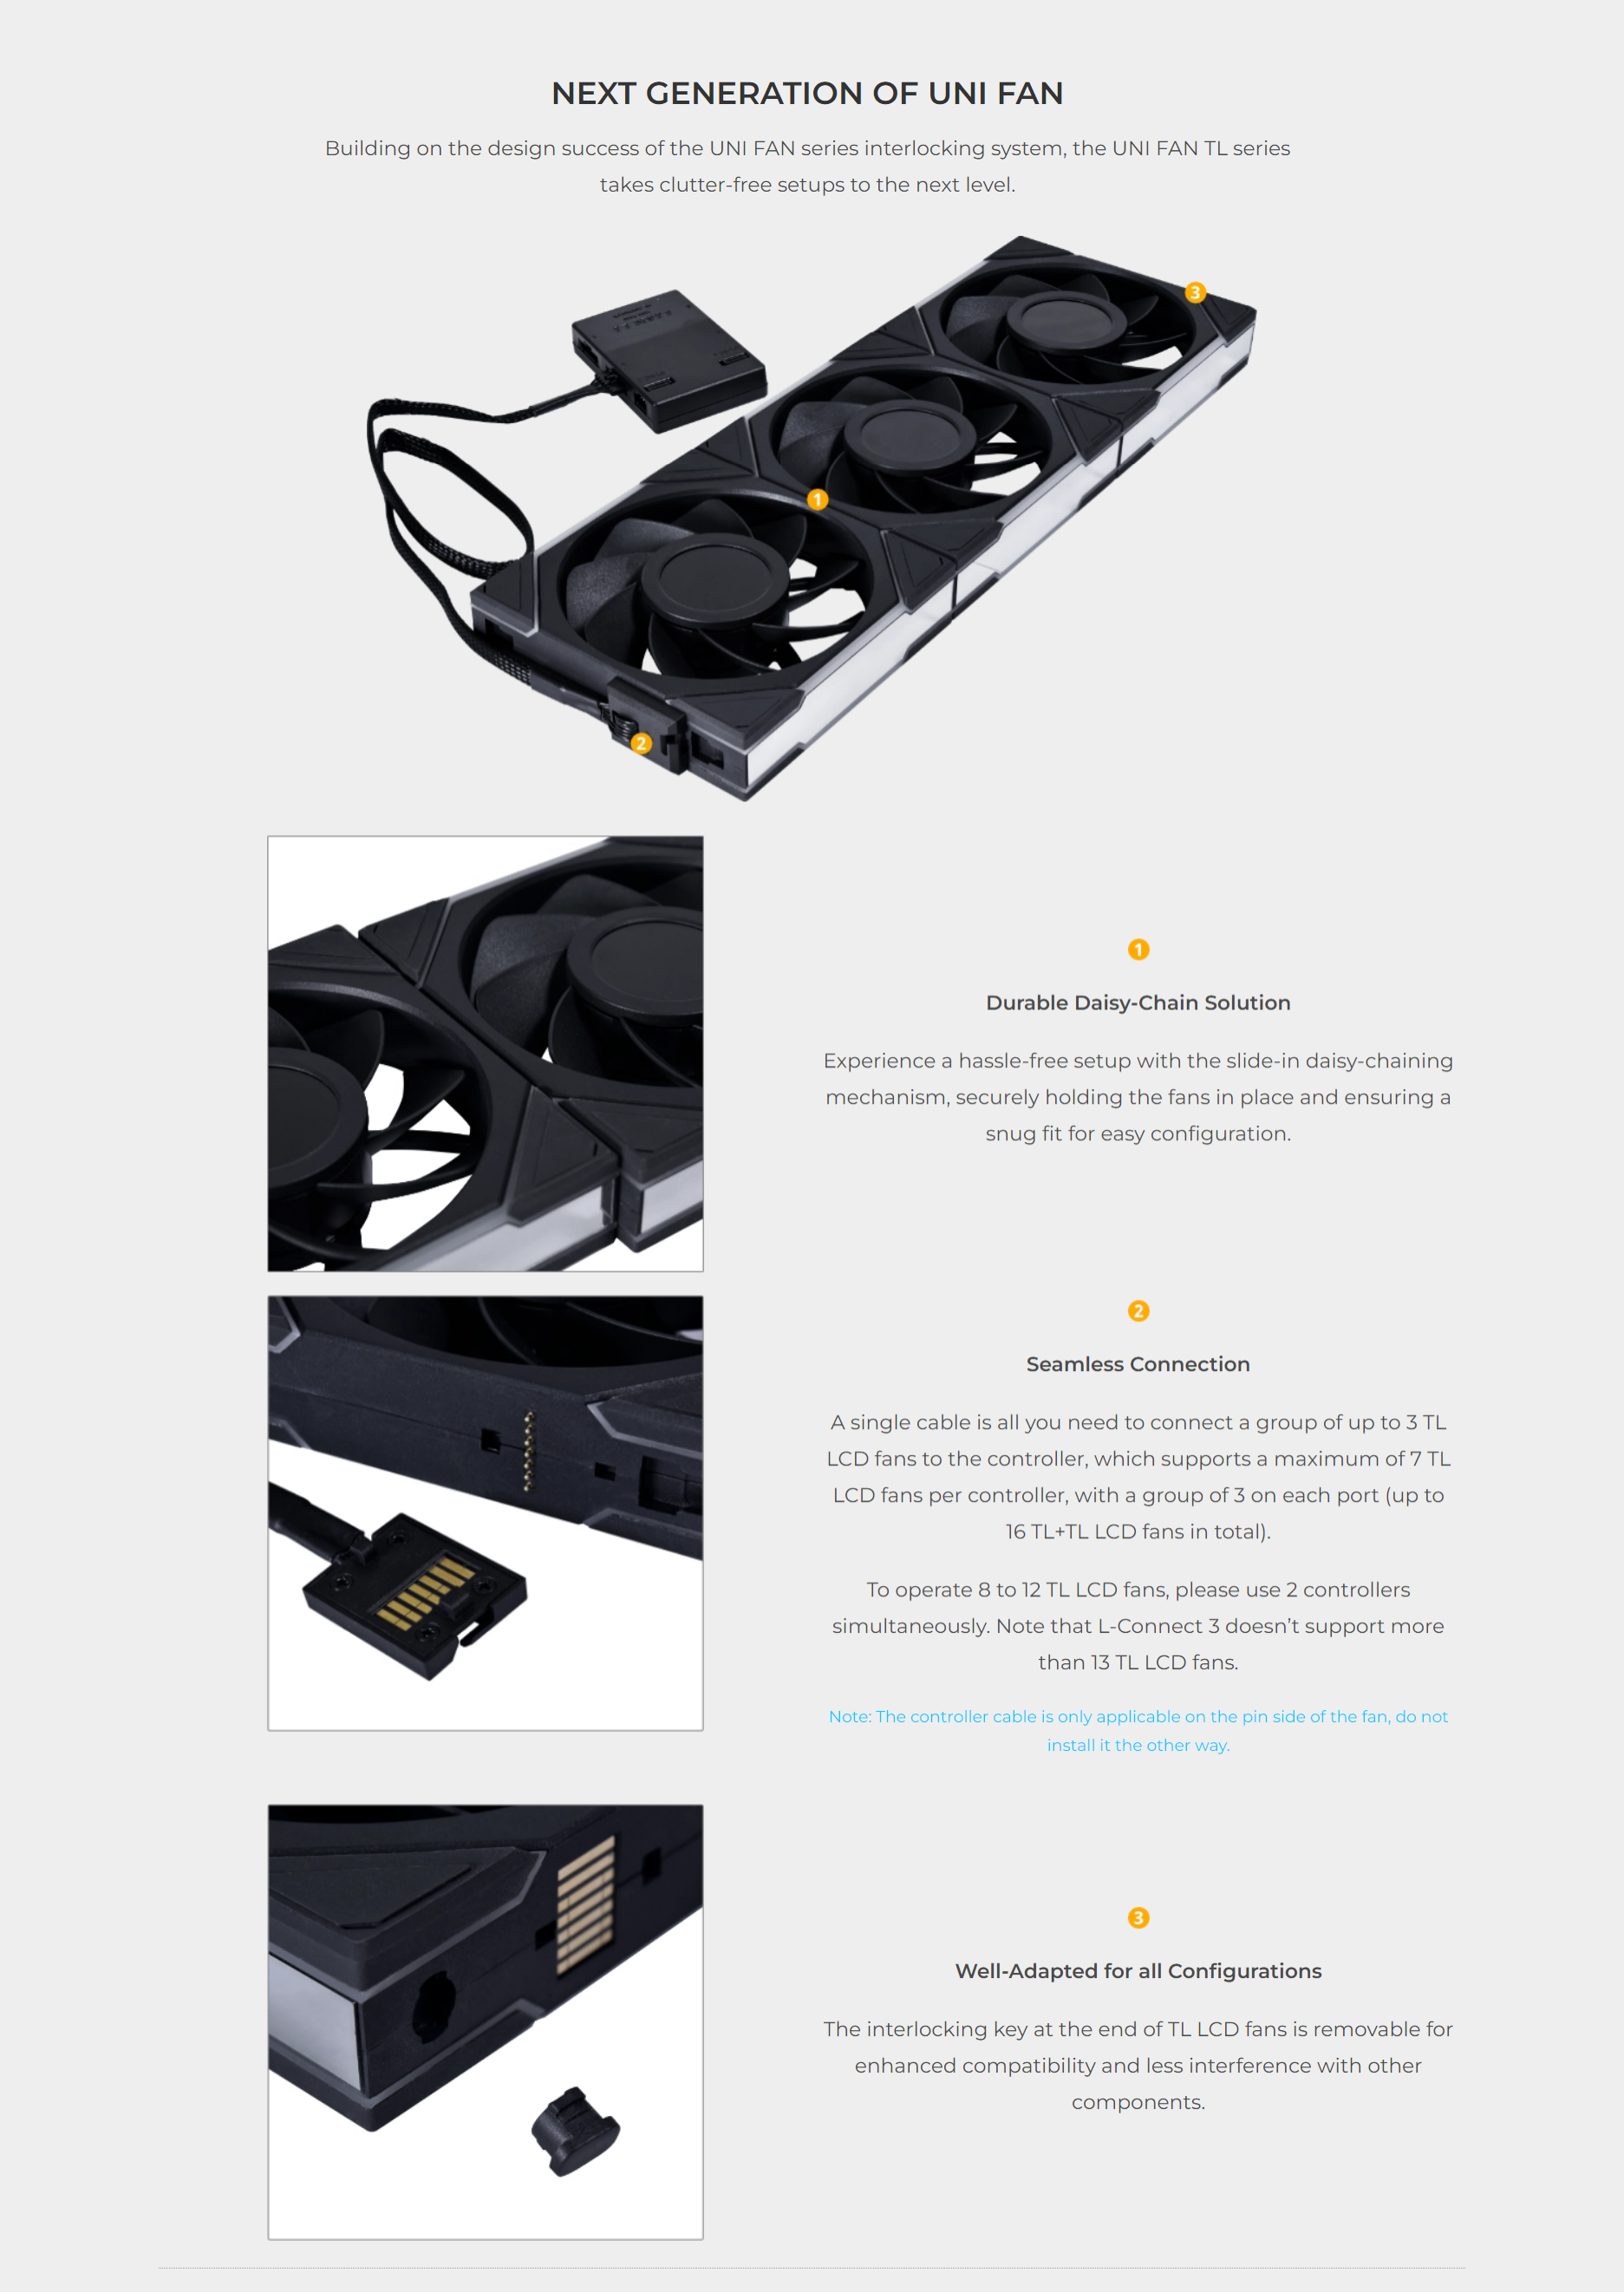 A large marketing image providing additional information about the product Lian Li UNI Fan TL LCD 120 Reverse Blade 120mm Fan Single Pack - Black - Additional alt info not provided